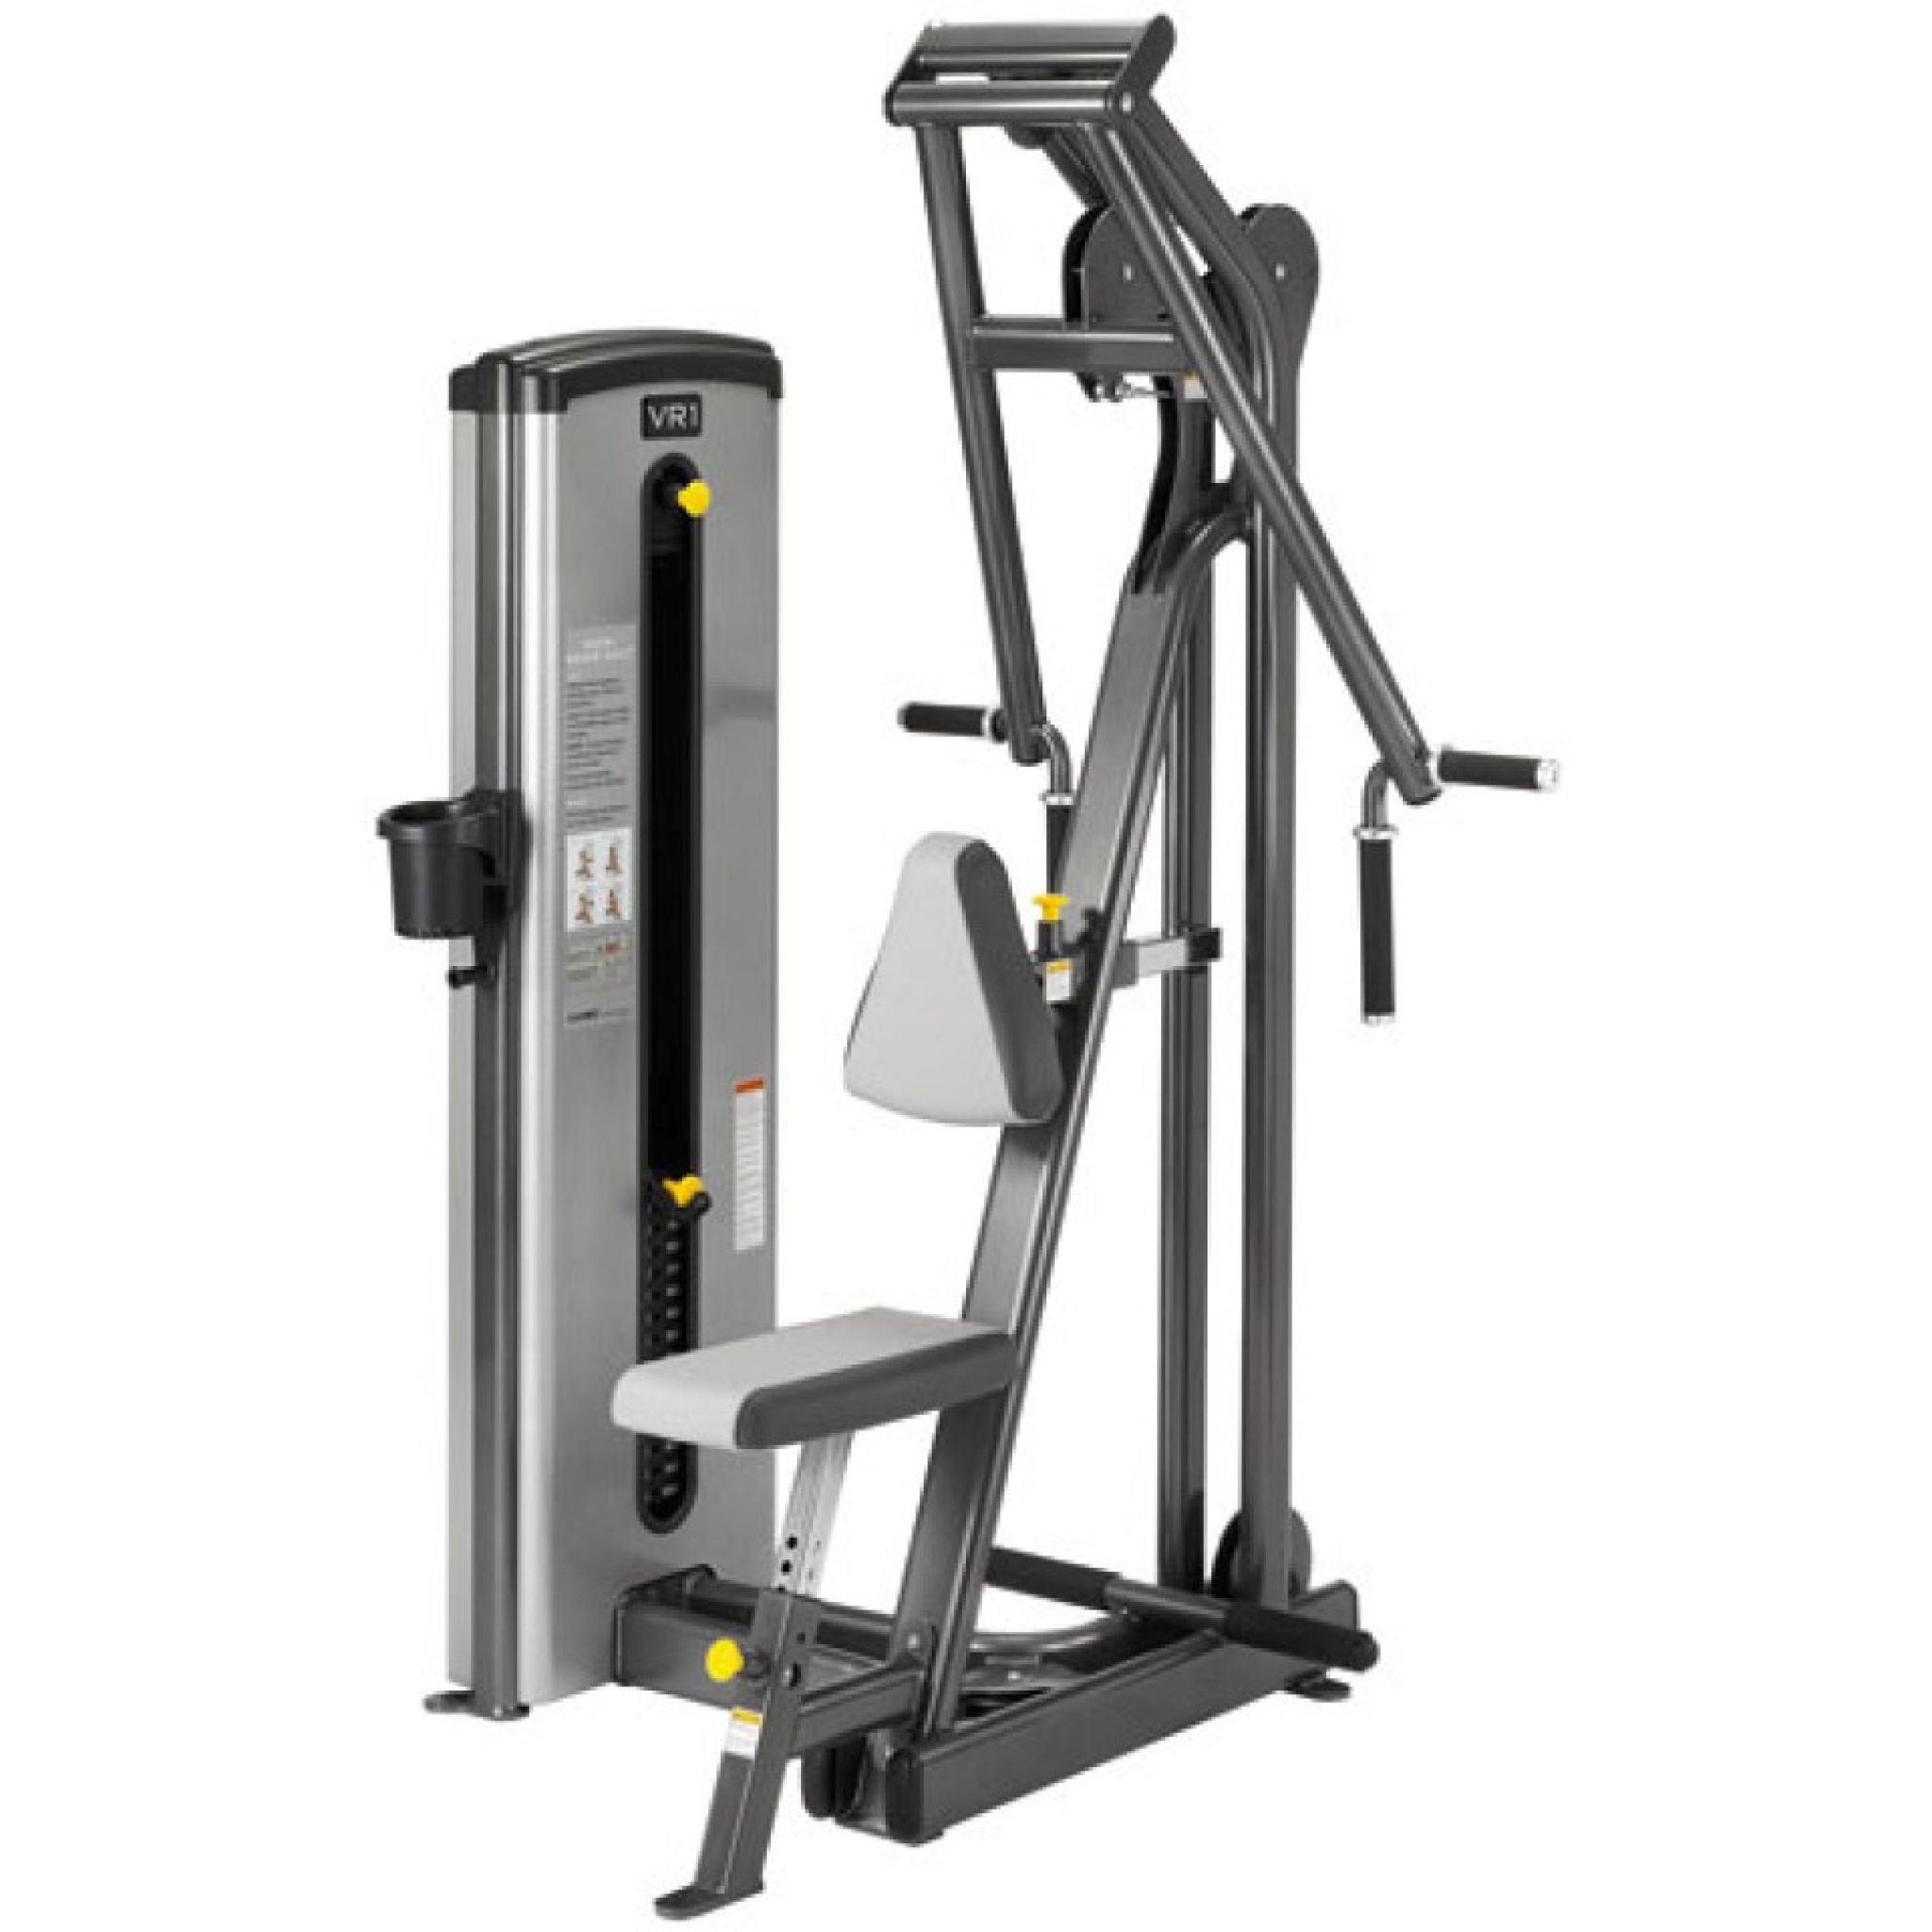 Front right view of the Cybex VR1 Row and Rear Delt Machine